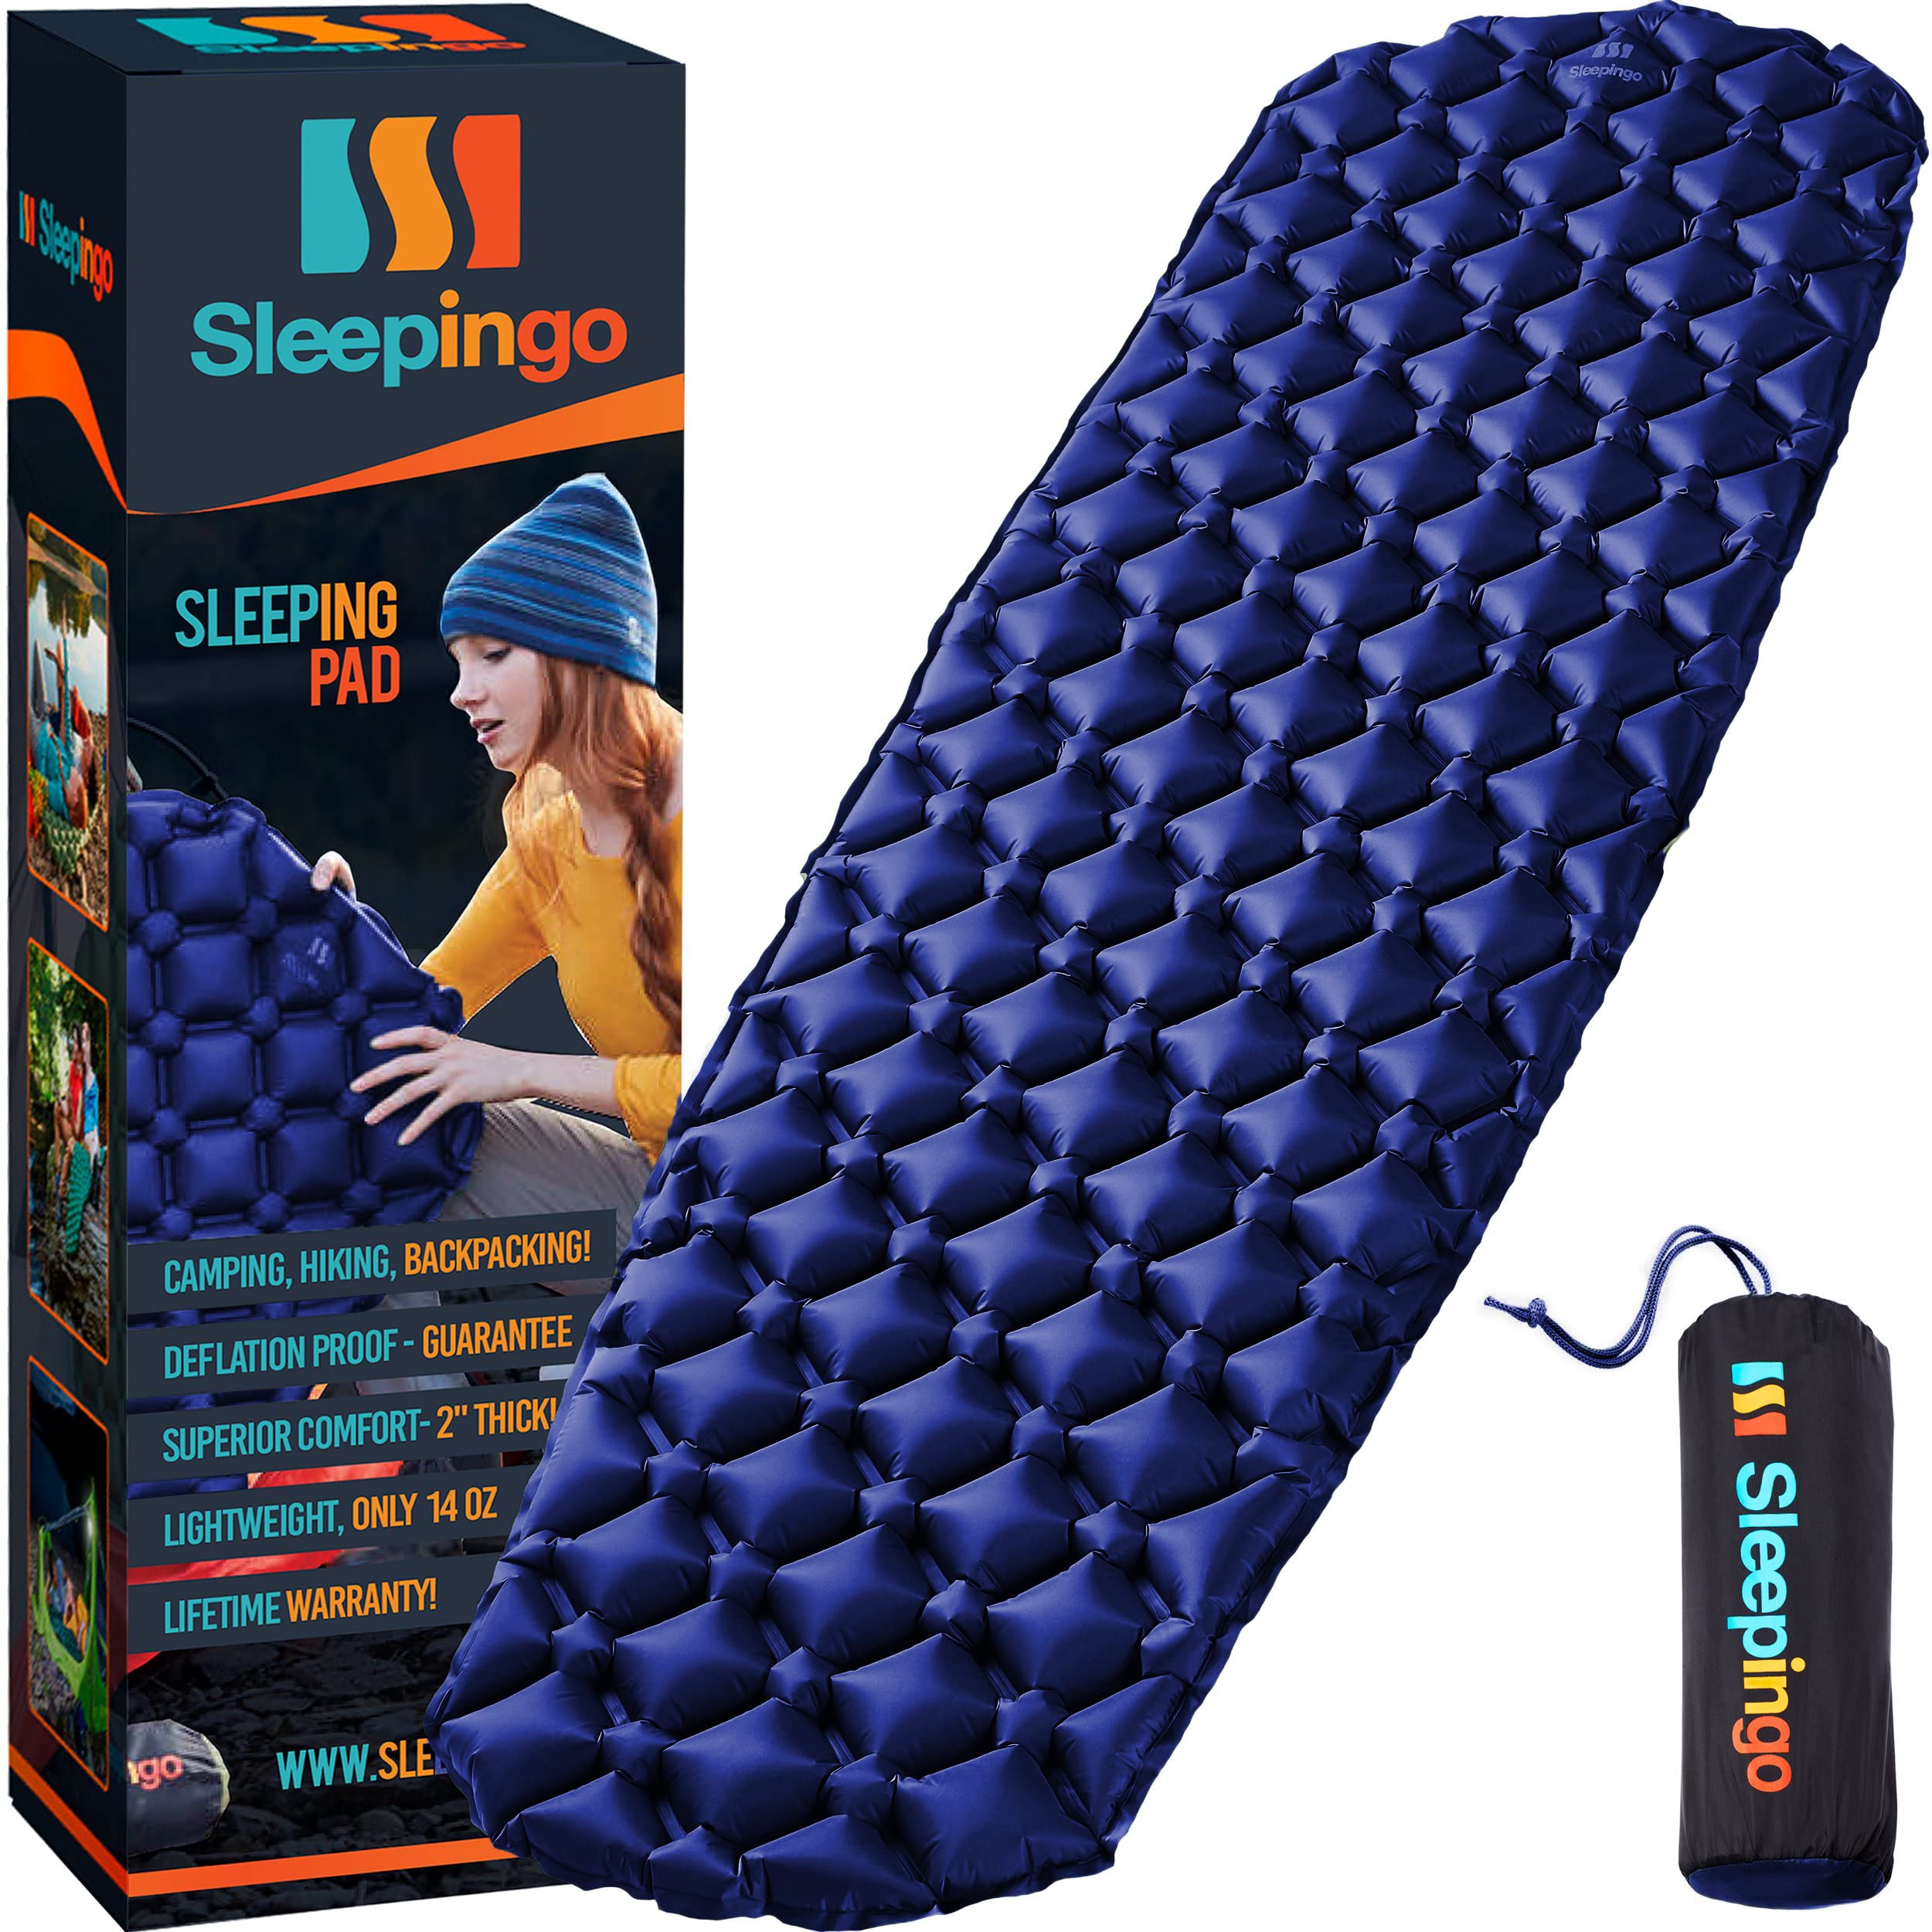 Sleepingo Large Sleeping Pad for Camping - Ultralight Sleeping/Camping Mat for Backpacking - Camping Pad - Lightweight, Inflatable & Compact Camping Air Mattress - Backpacking Sleeping Pad - Sleep Pad  - Very Good